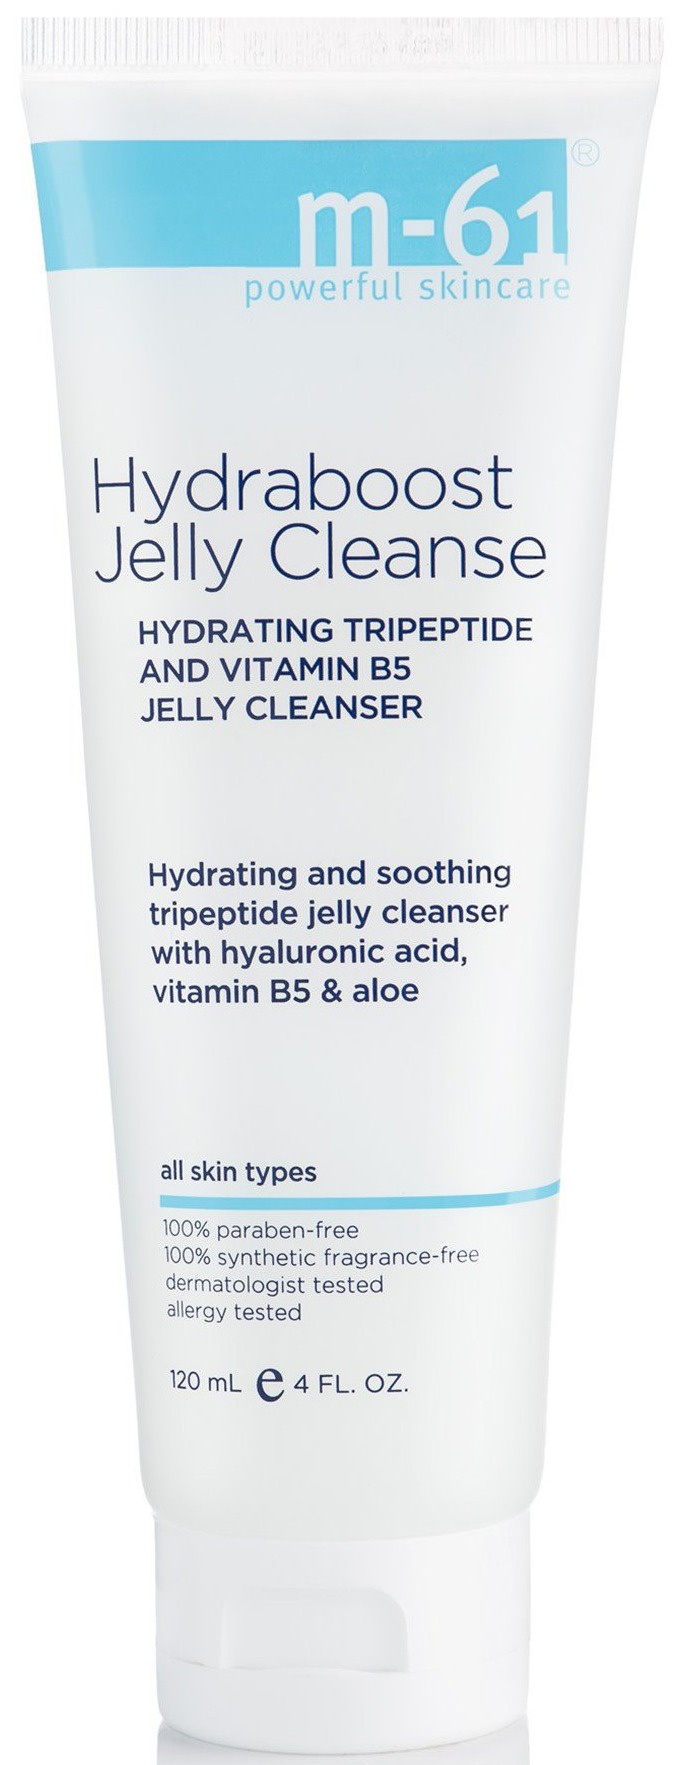 M-61 Hydraboost Jelly Cleanse